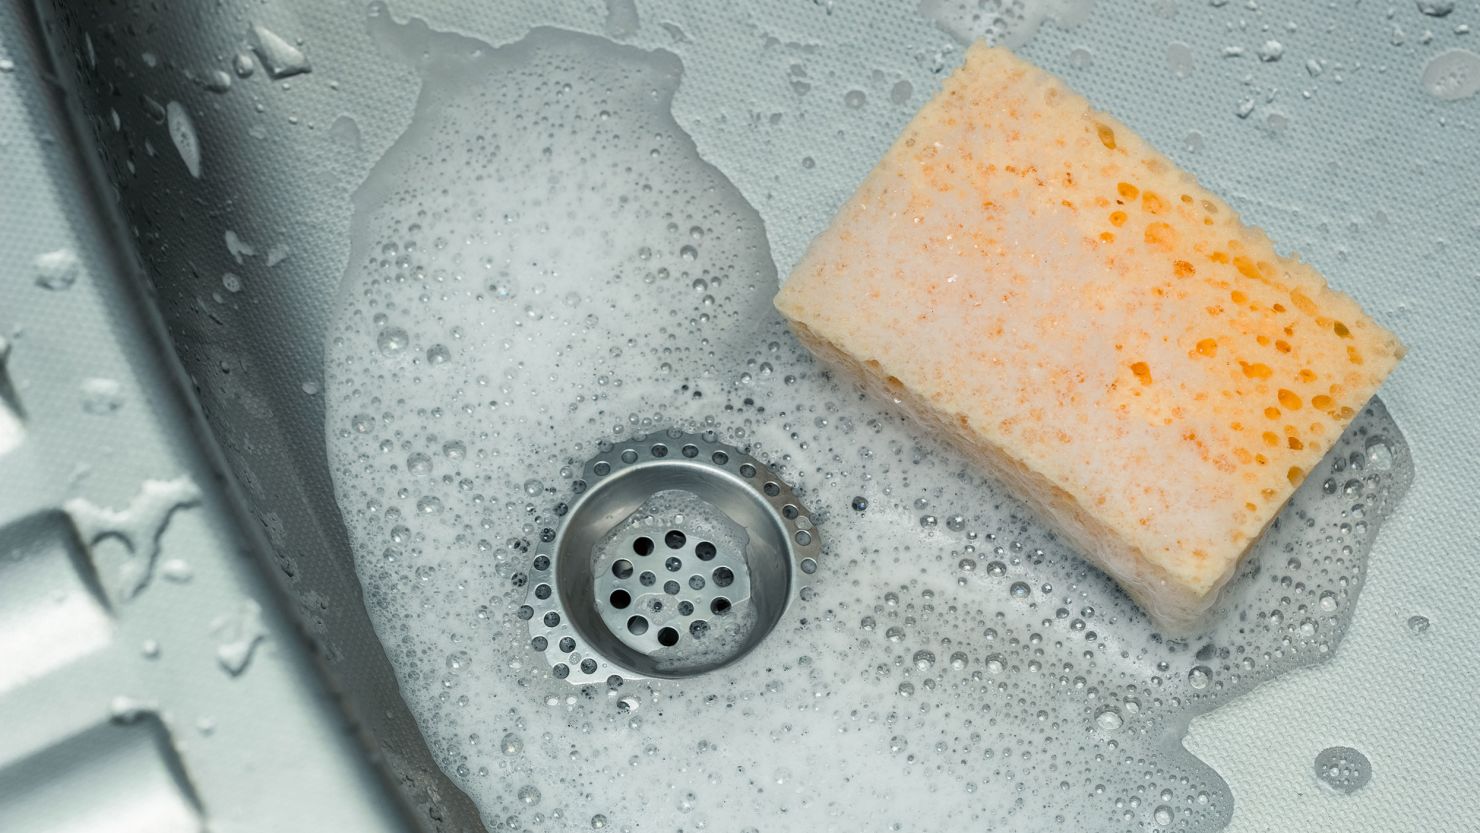 Kitchen sponges: 5 remedies to sterilize them and free them from germs and  bacteria